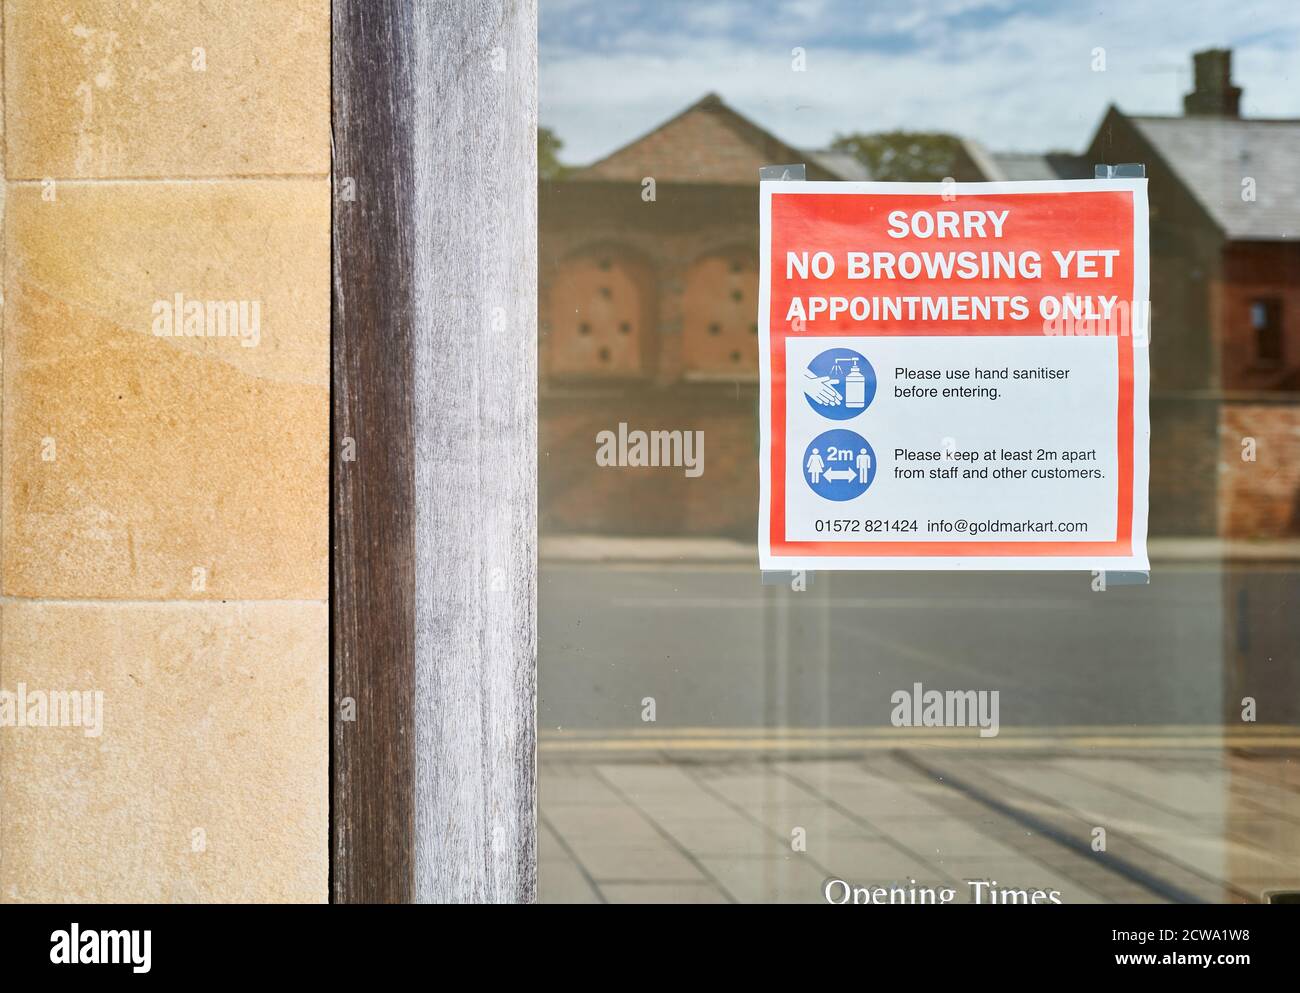 A shop in the market town of Uppingham, Rutland, England, open only to appointments during the coronavirus epidemic, September 2020. Stock Photo